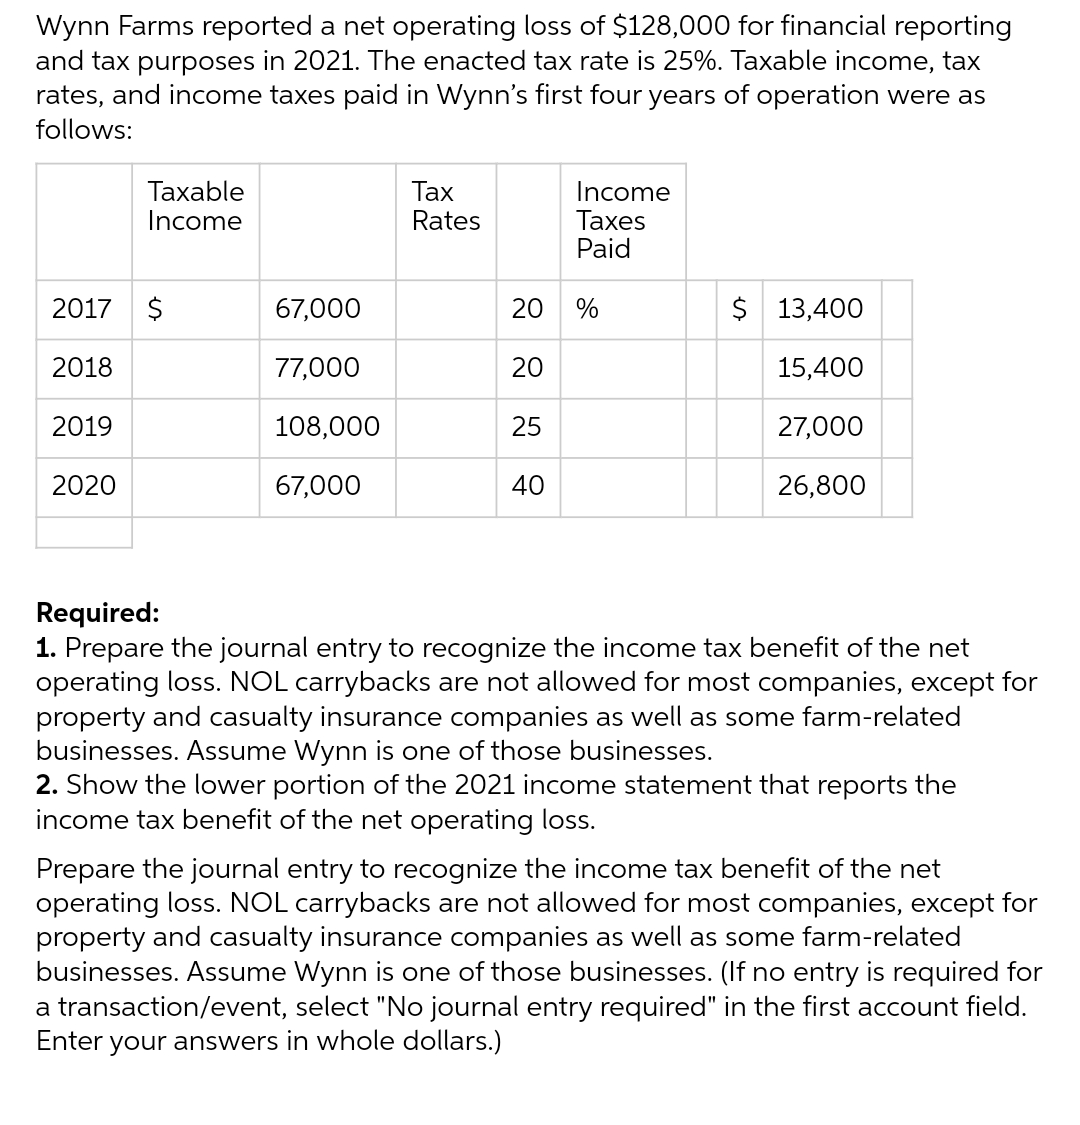 Wynn Farms reported a net operating loss of $128,000 for financial reporting
and tax purposes in 2021. The enacted tax rate is 25%. Taxable income, tax
rates, and income taxes paid in Wynn's first four years of operation were as
follows:
Taxable
Tax
Income
Income
Rates
Taxes
Paid
2017 $
67,000
20 %
$ 13,400
2018
77,000
20
15,400
2019
108,000
25
27,000
2020
67,000
40
26,800
Required:
1. Prepare the journal entry to recognize the income tax benefit of the net
operating loss. NOL carrybacks are not allowed for most companies, except for
property and casualty insurance companies as well as some farm-related
businesses. Assume Wynn is one of those businesses.
2. Show the lower portion of the 2021 income statement that reports the
income tax benefit of the net operating loss.
Prepare the journal entry to recognize the income tax benefit of the net
operating loss. NOL carrybacks are not allowed for most companies, except for
property and casualty insurance companies as well as some farm-related
businesses. Assume Wynn is one of those businesses. (If no entry is required for
a transaction/event, select "No journal entry required" in the first account field.
Enter your answers in whole dollars.)